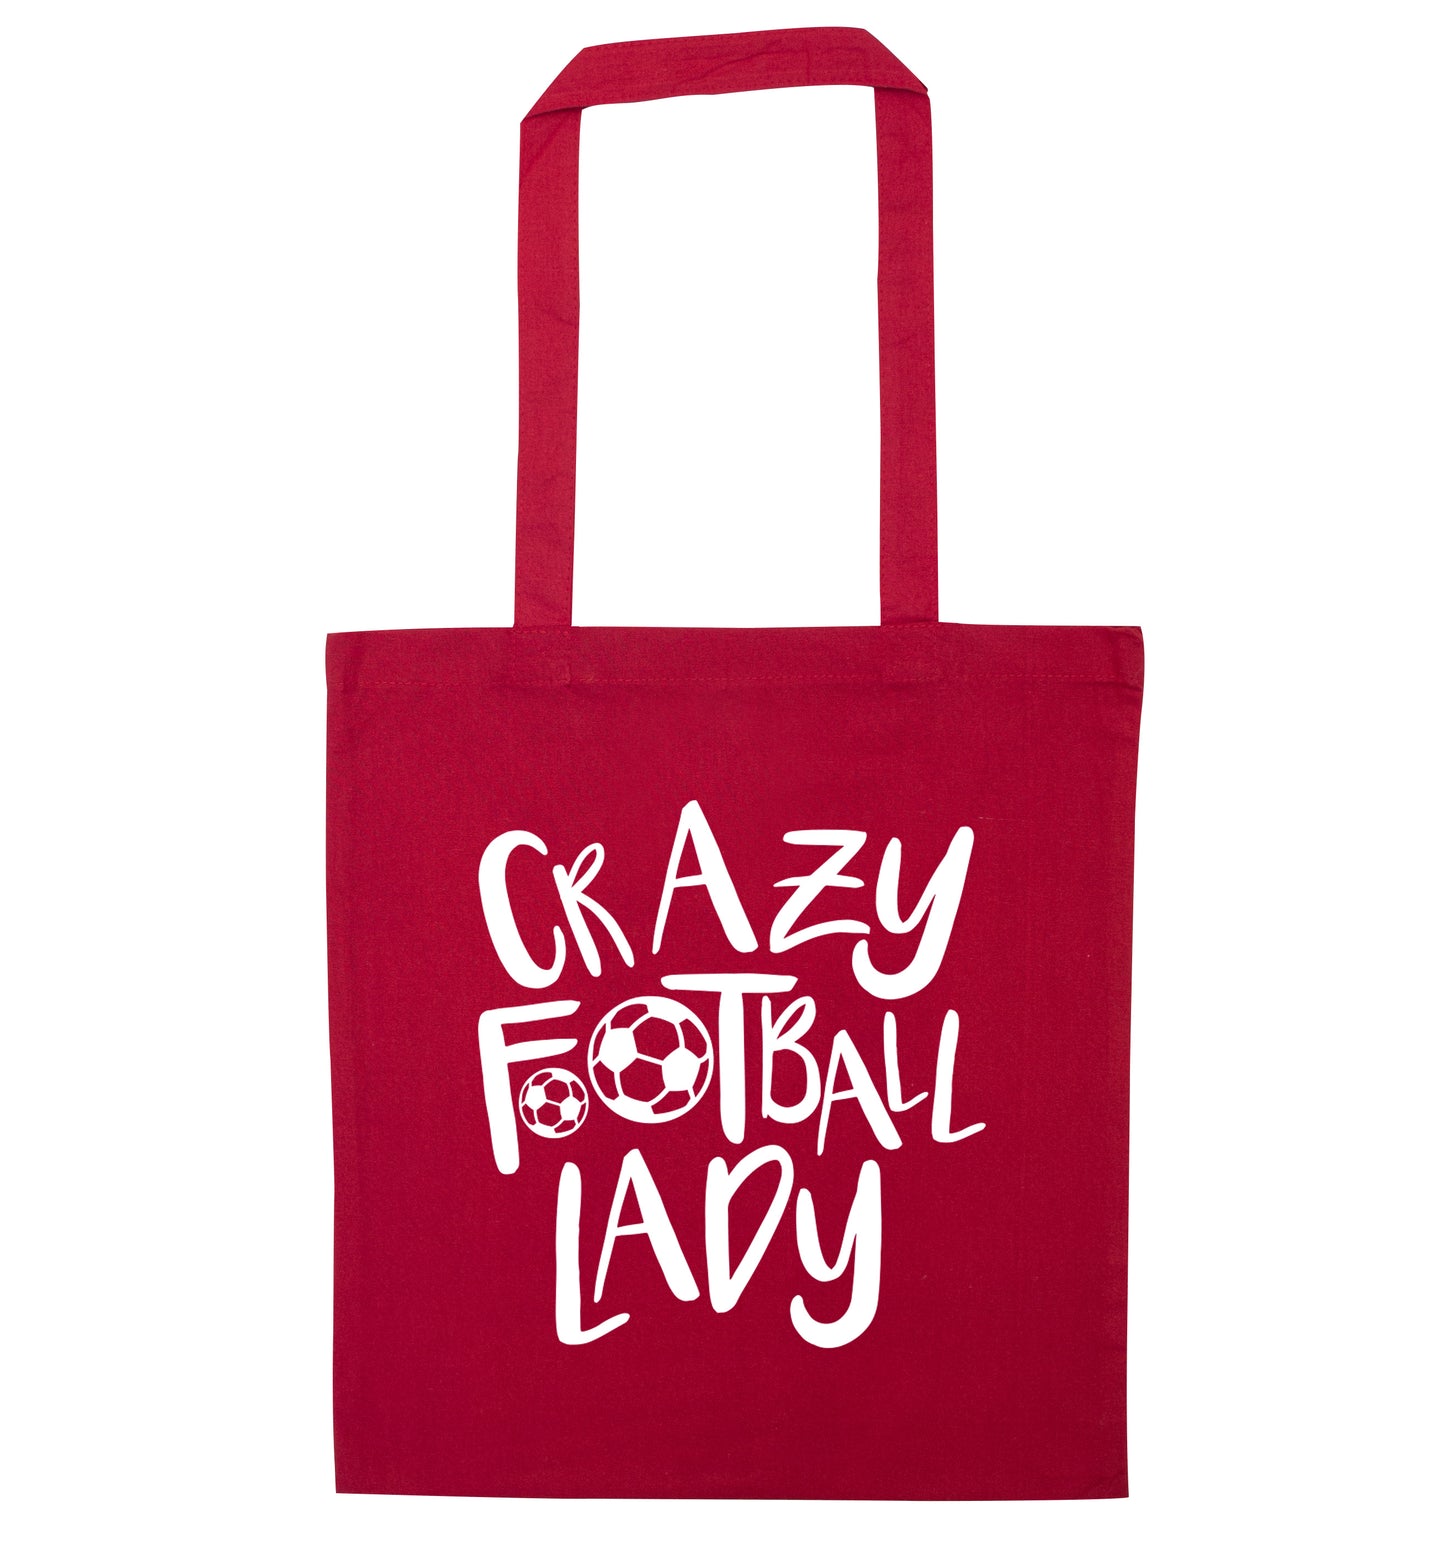 Crazy football lady red tote bag